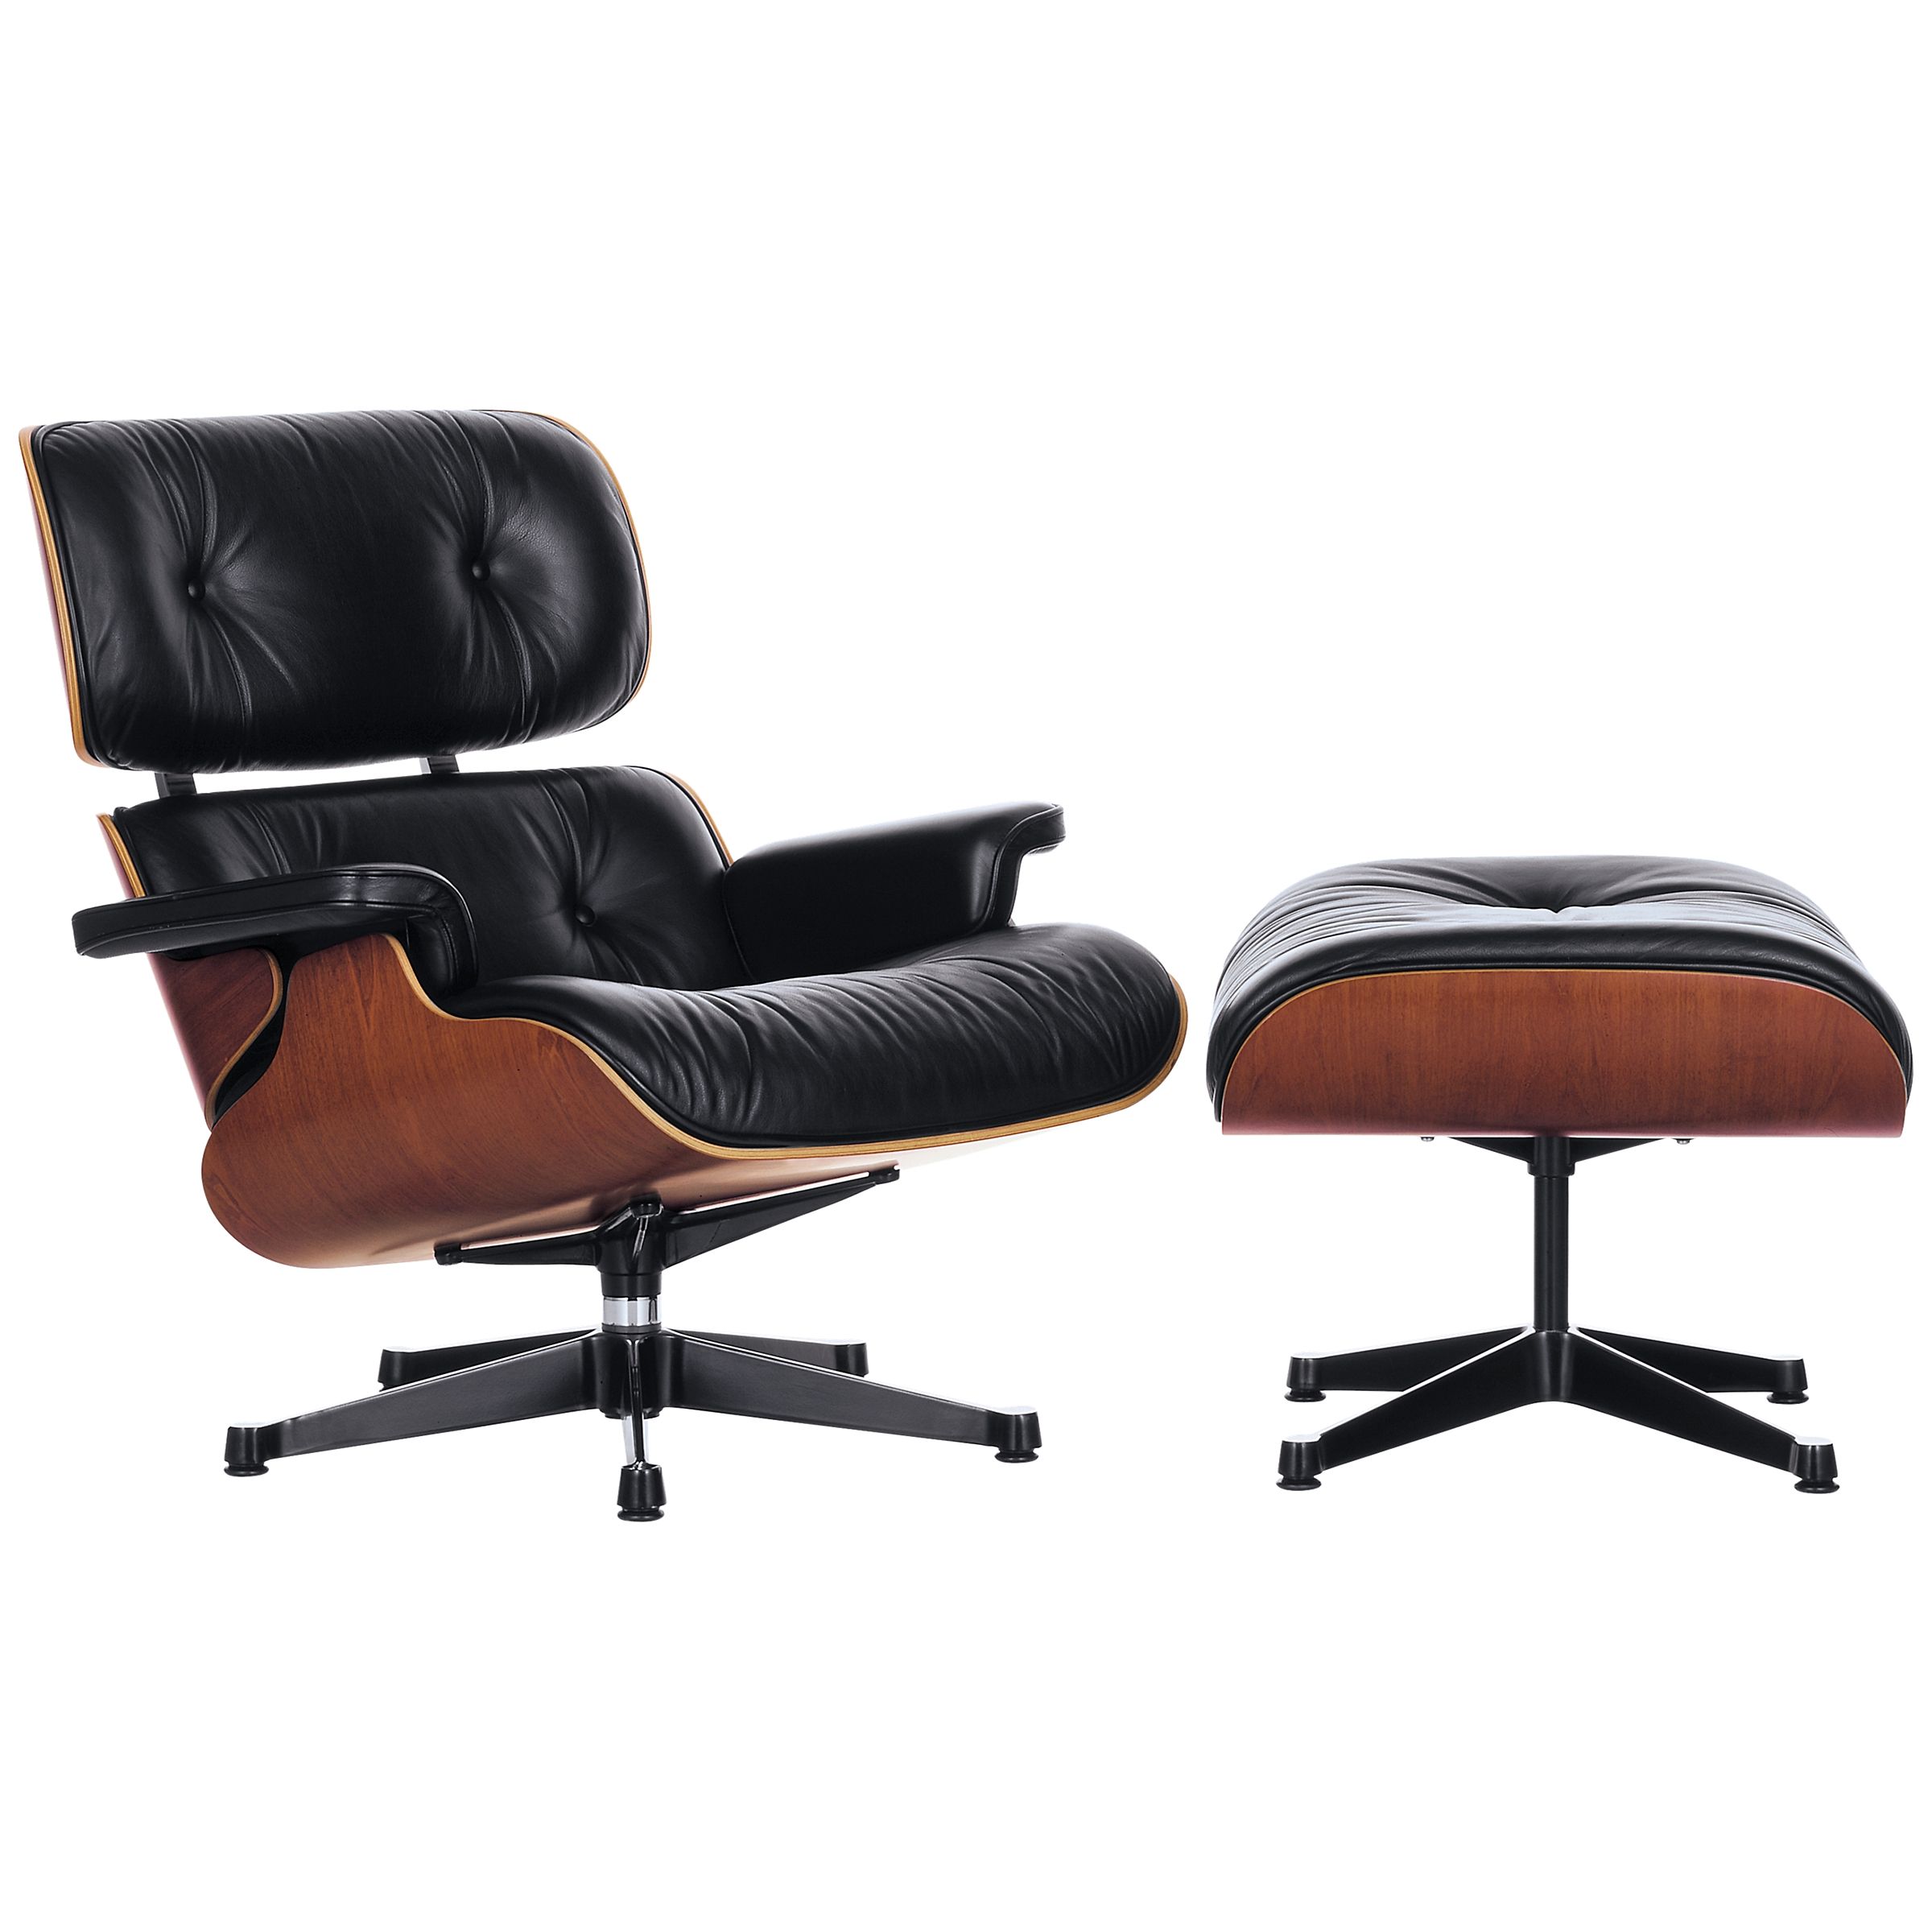 Photo of Vitra eames classic leather lounge chair and ottoman black/palisander